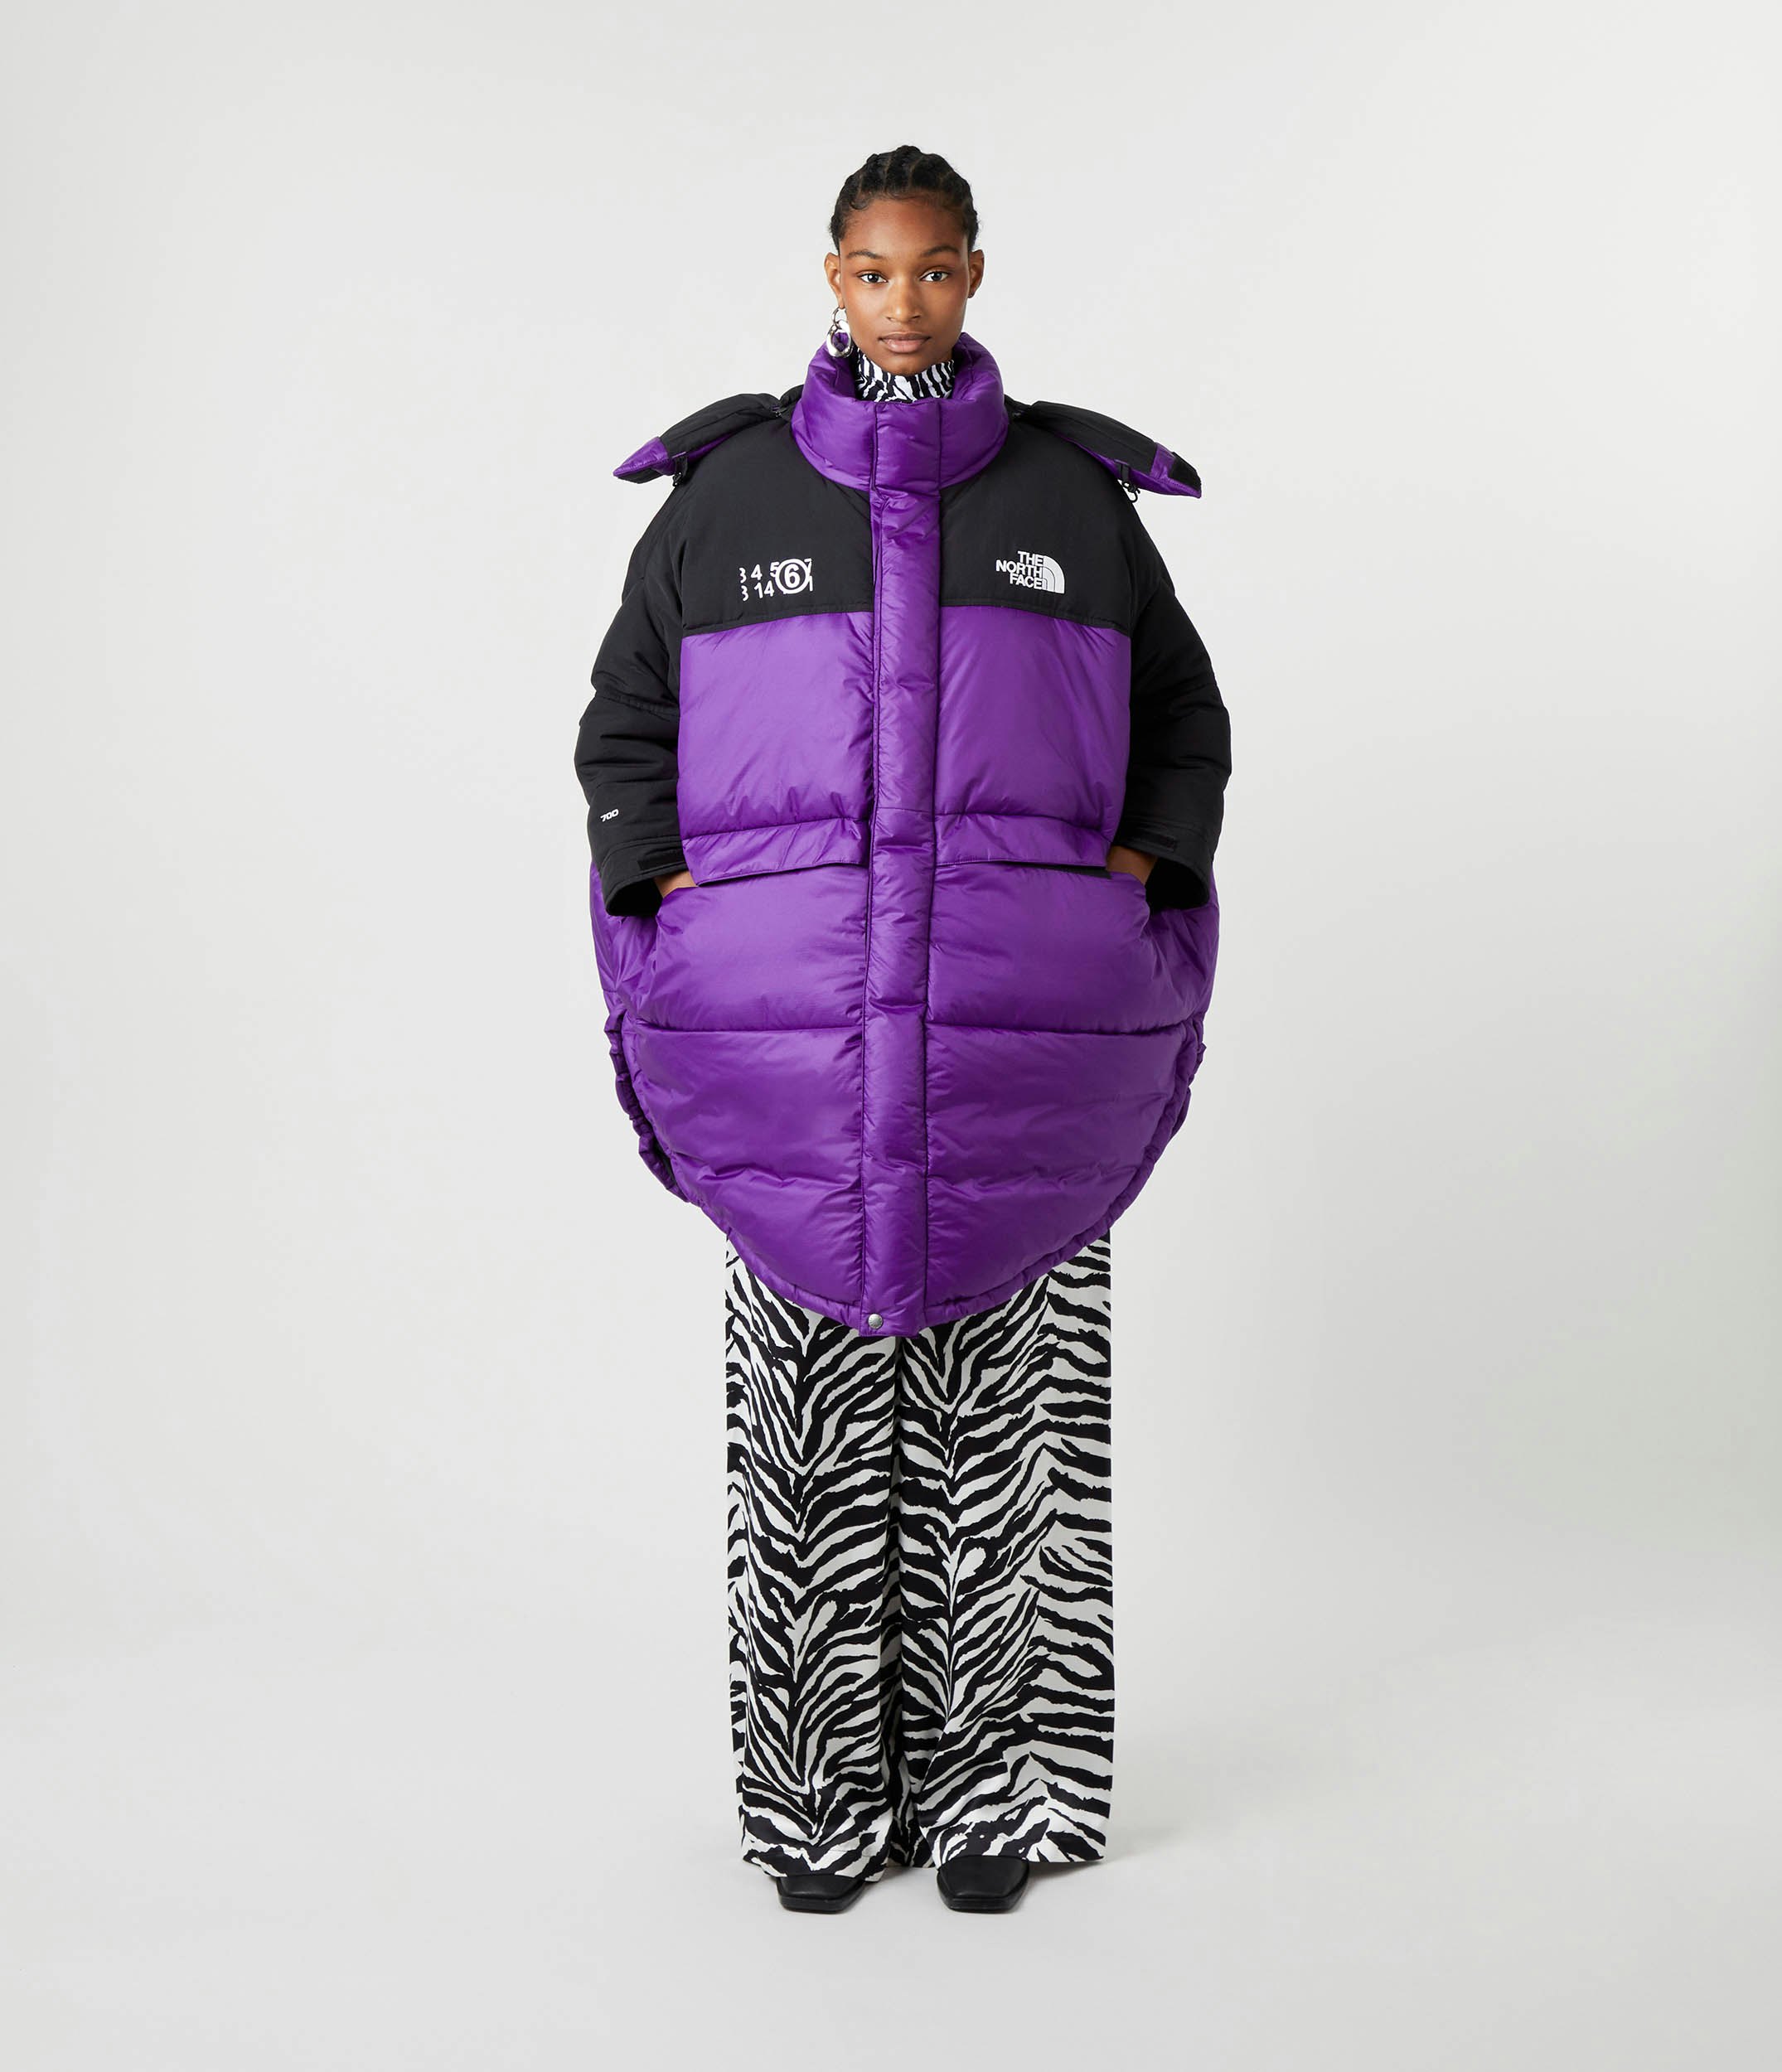 The North Face and MM6 Maison Margiela's outrageous outdoor gear